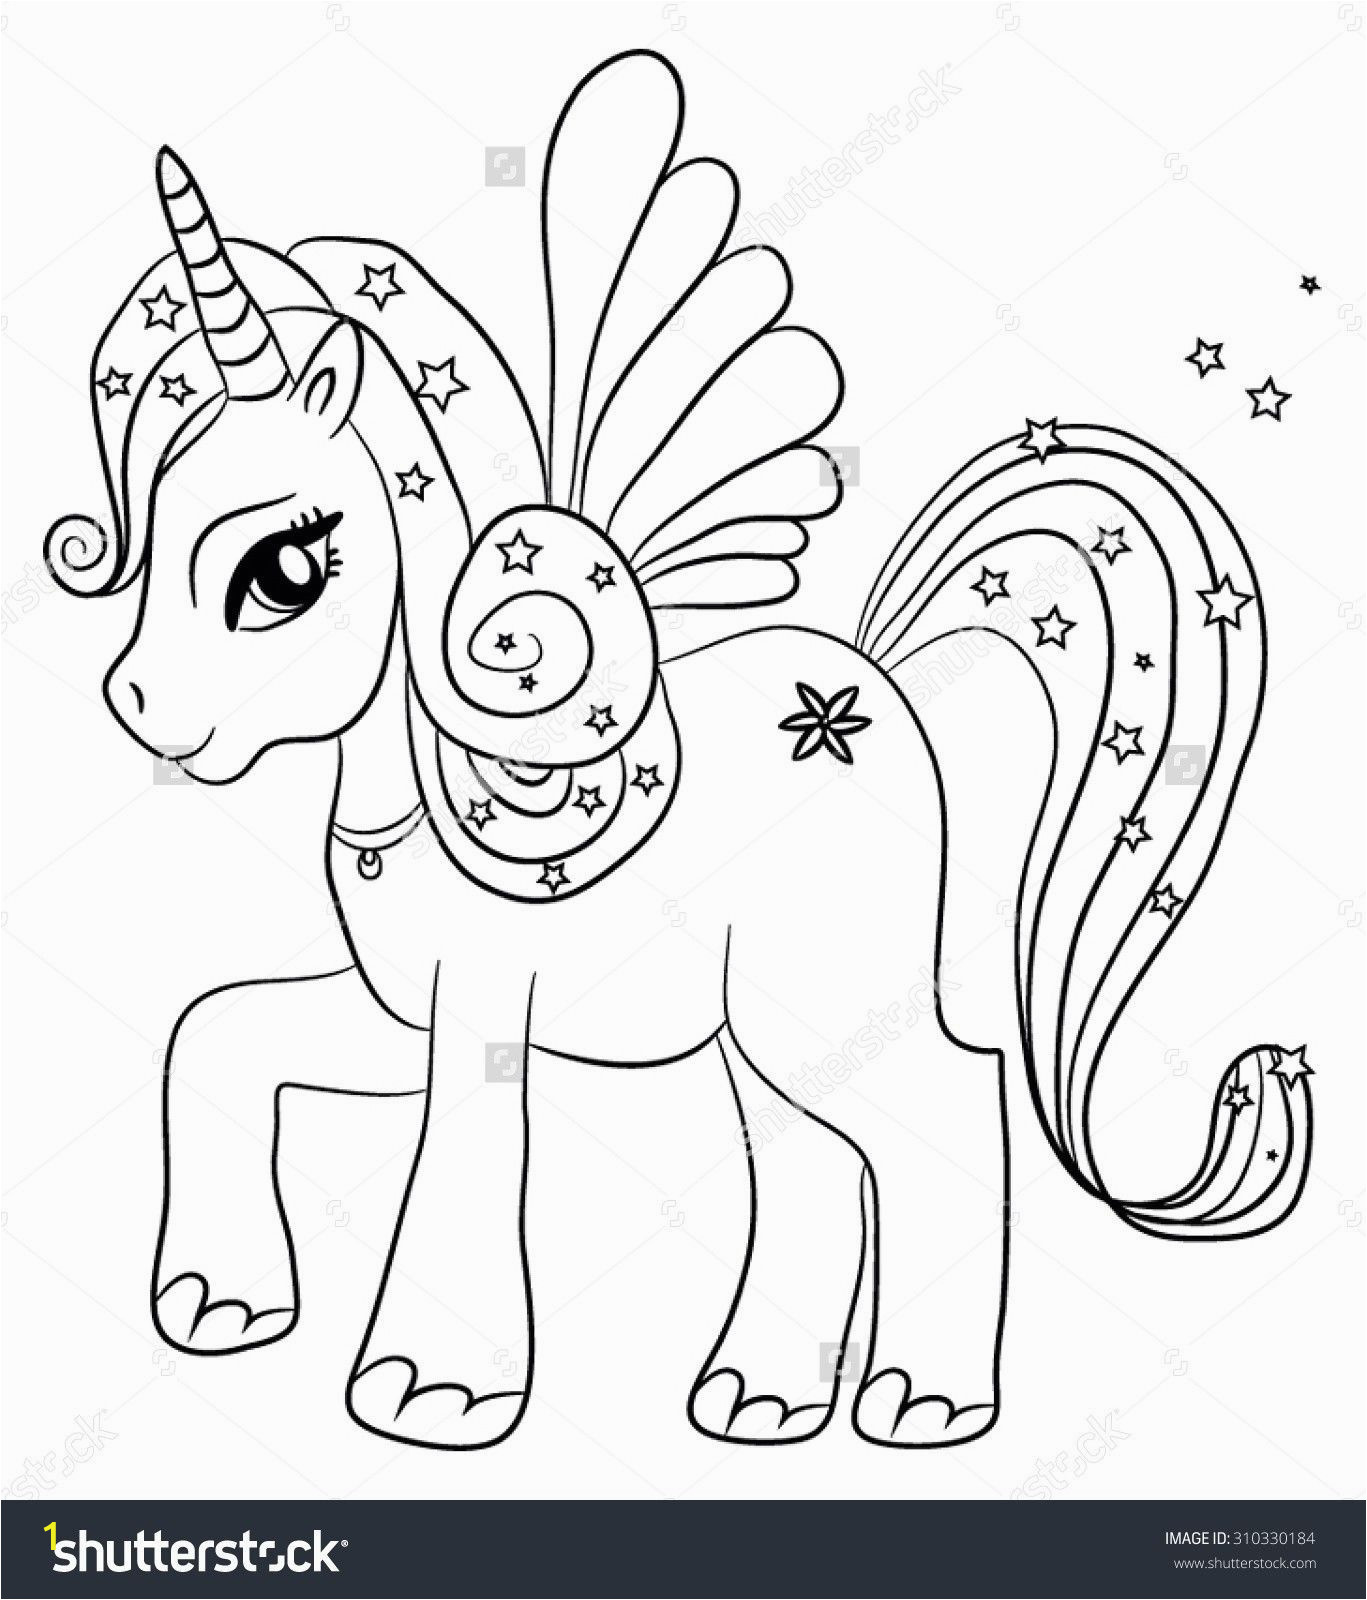 Cute Free Printable Coloring Pages Coloring Pages Unicorns Print Saferbrowser Image Search